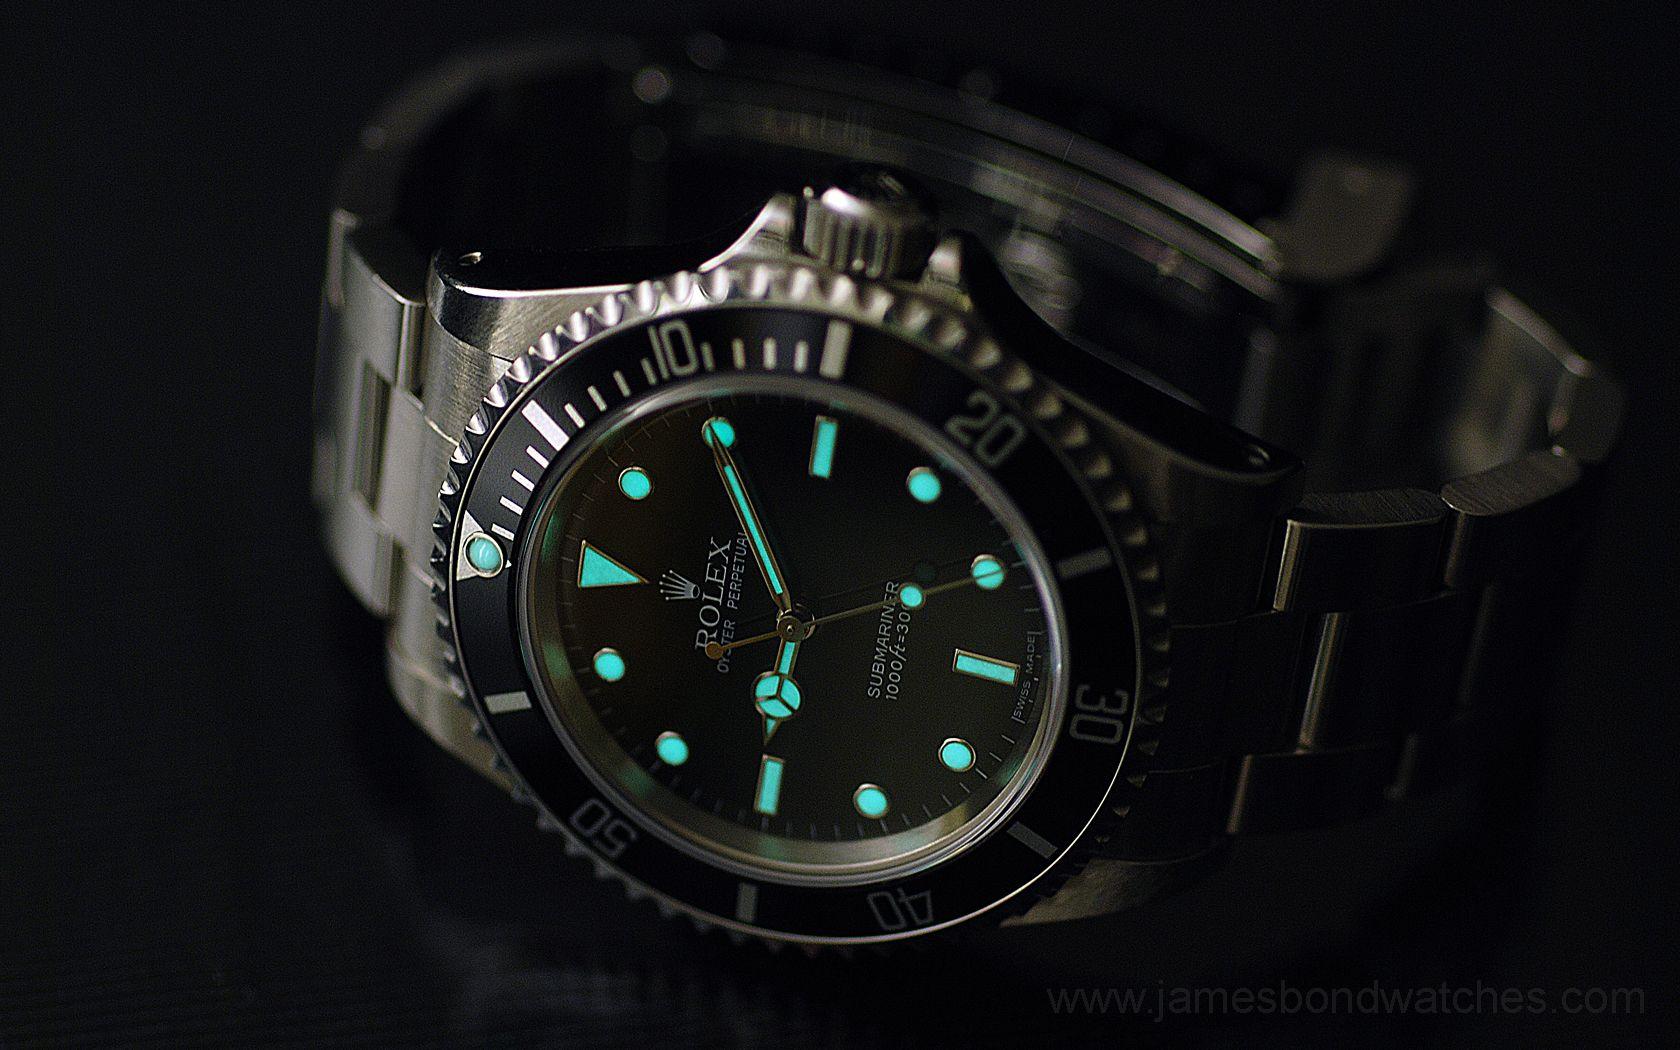 Rolex Submariner image and wallpaper: James Bond Watches exclusive